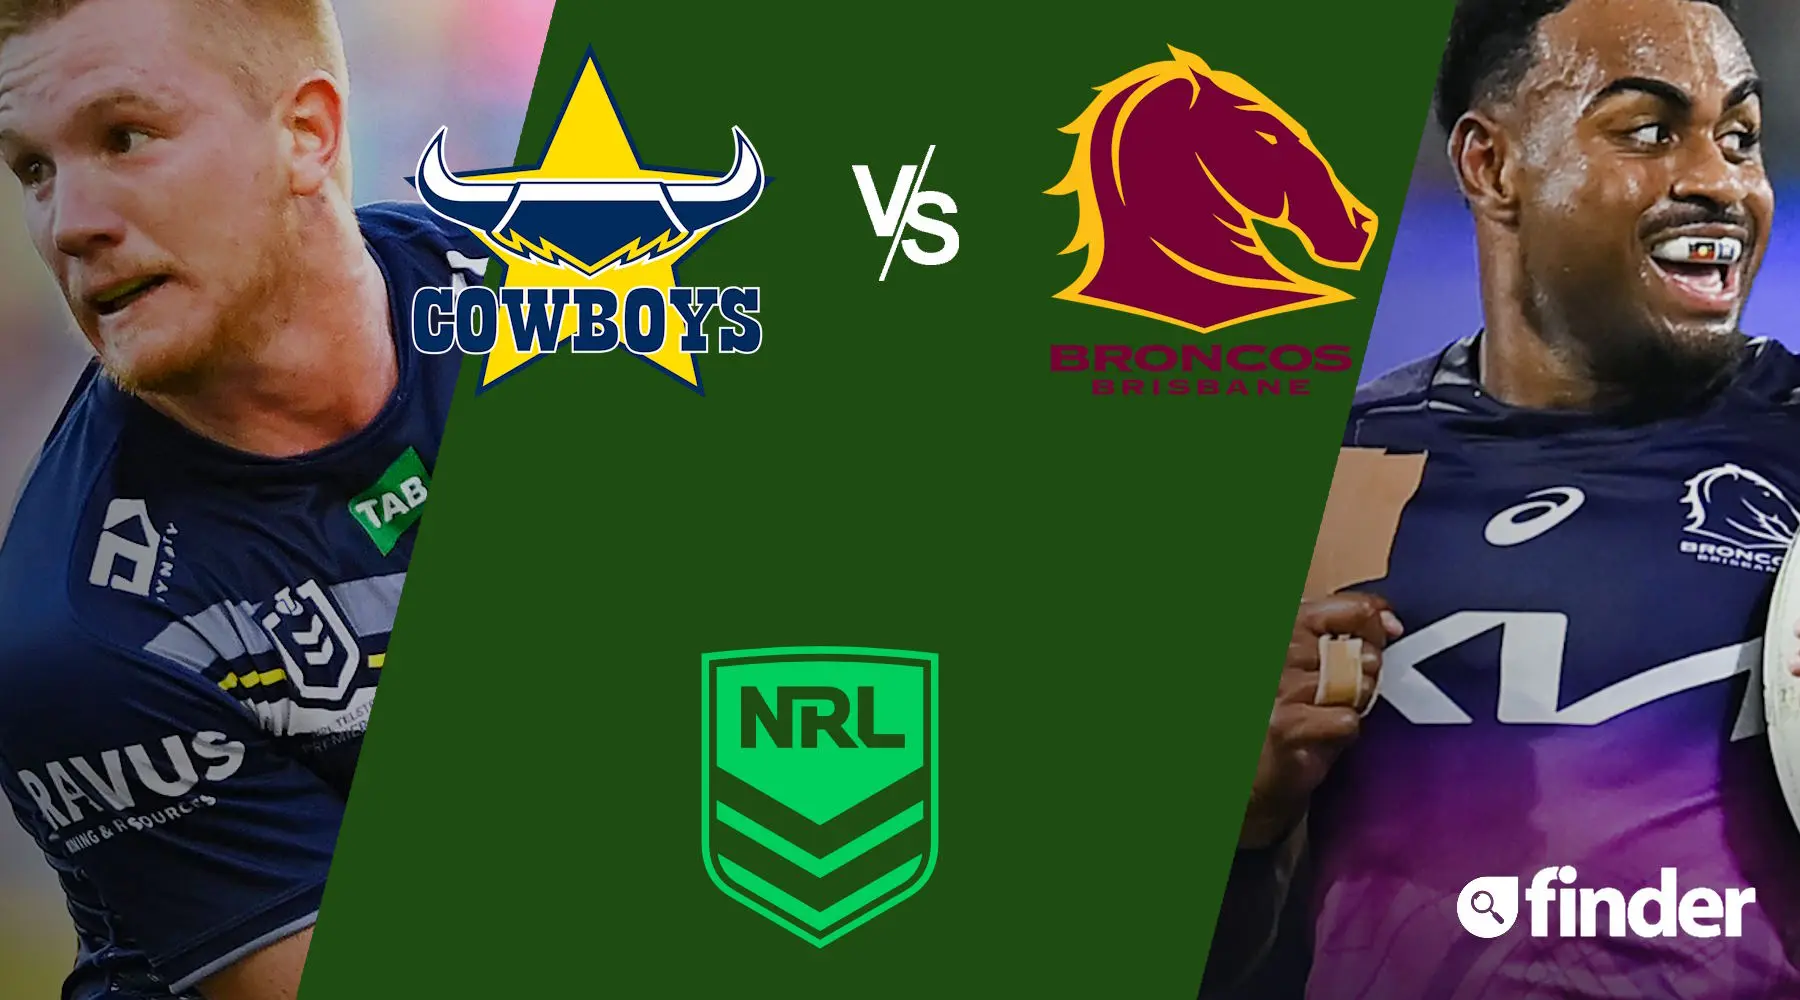 How to watch Cowboys vs Broncos NRL live and match preview